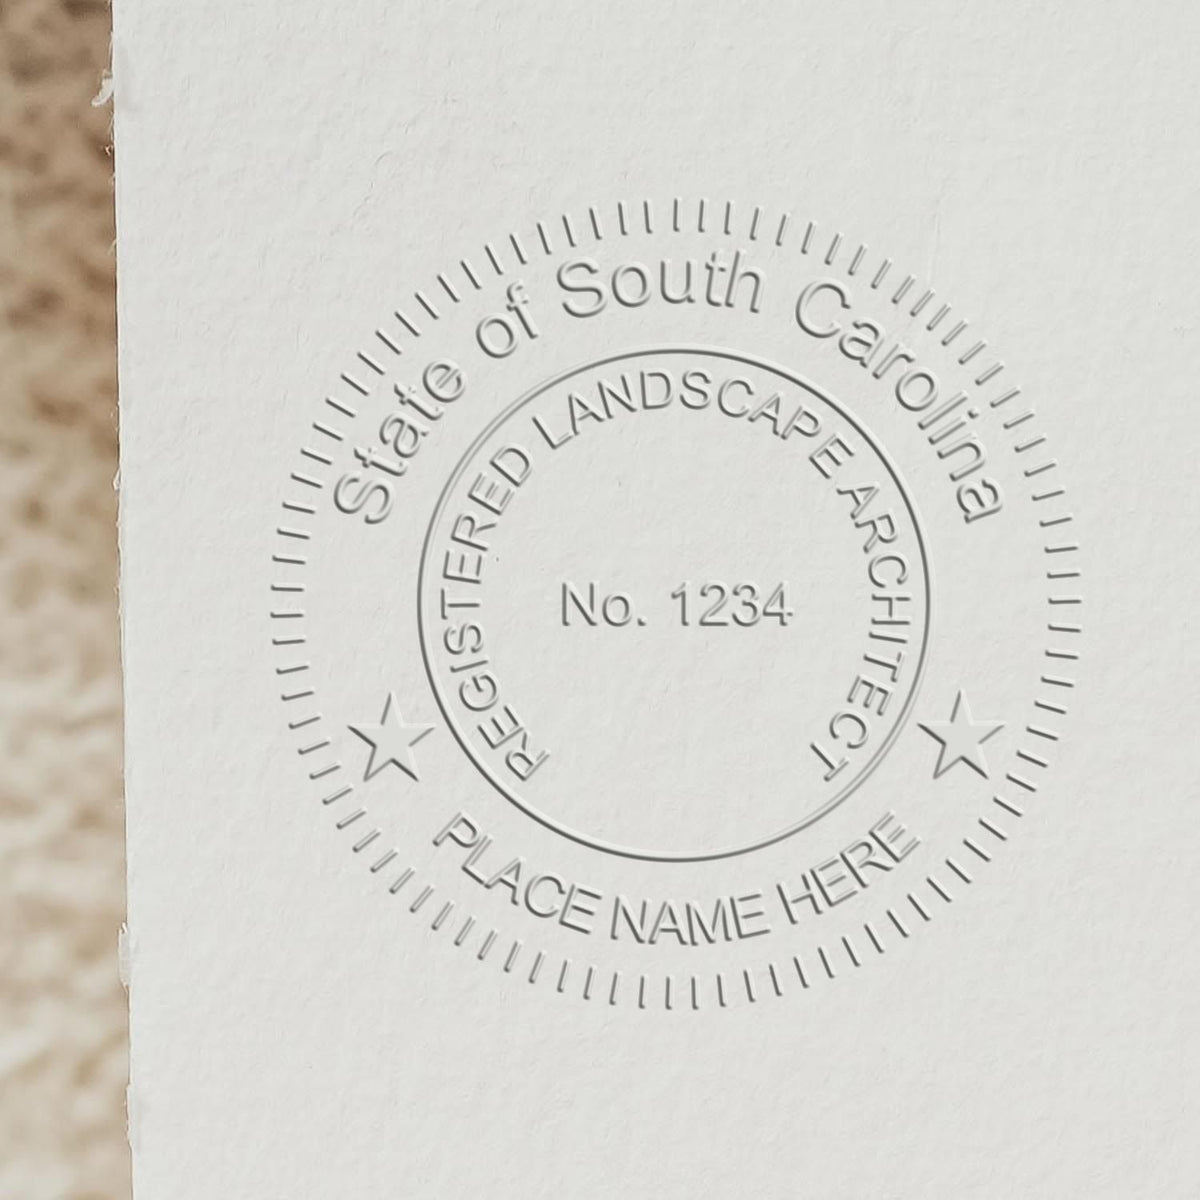 An in use photo of the Hybrid South Carolina Landscape Architect Seal showing a sample imprint on a cardstock